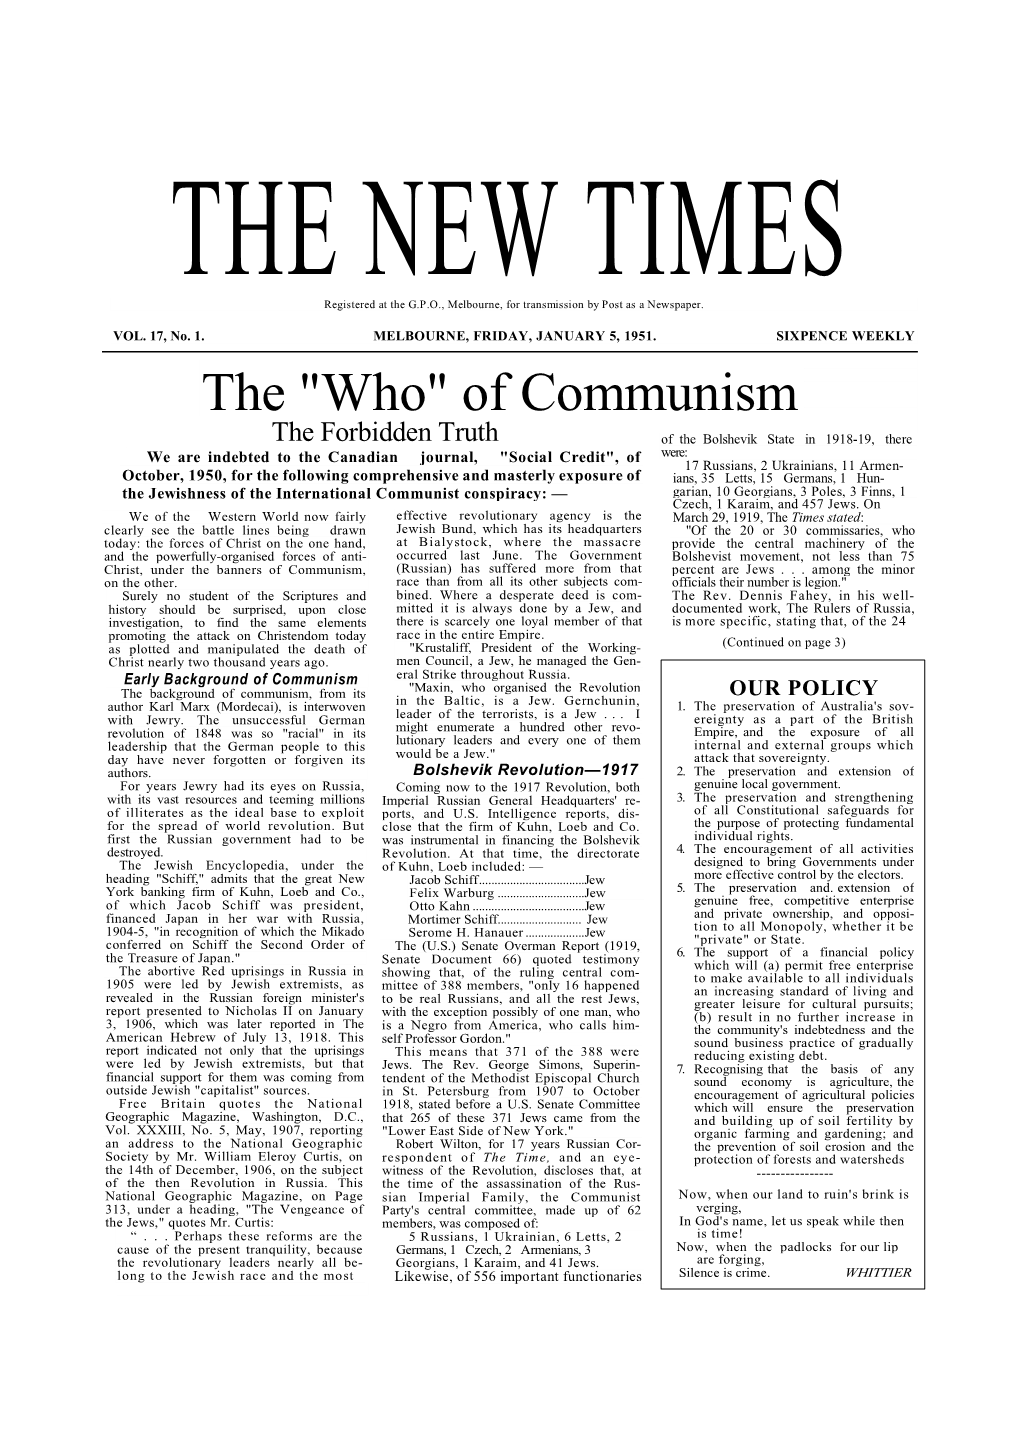 The "Who" of Communism